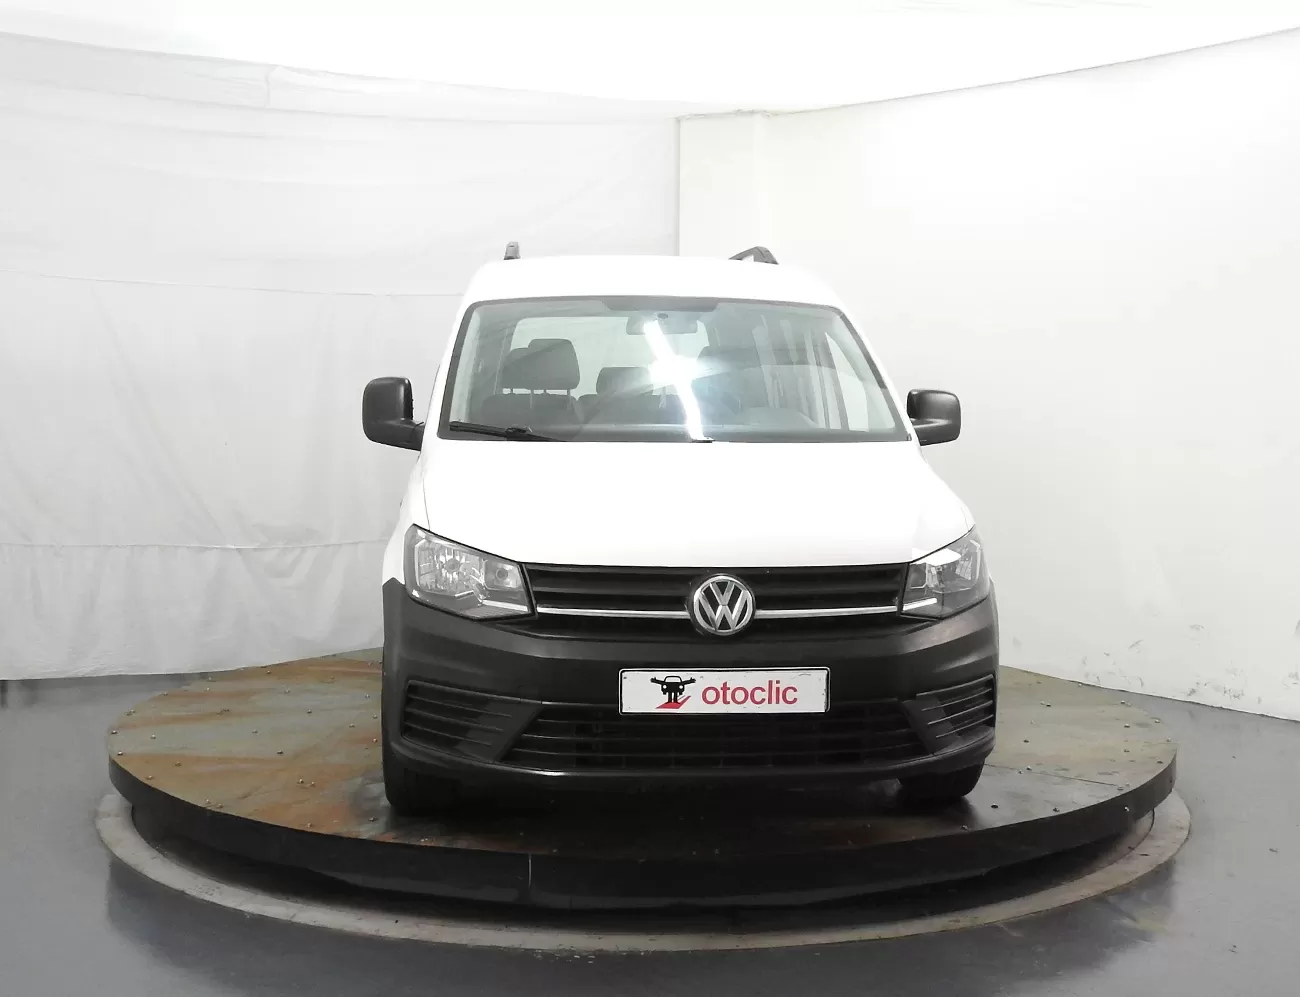 Volkswagen Caddy 2.0 TDI110 Ecoline Clim 5 places